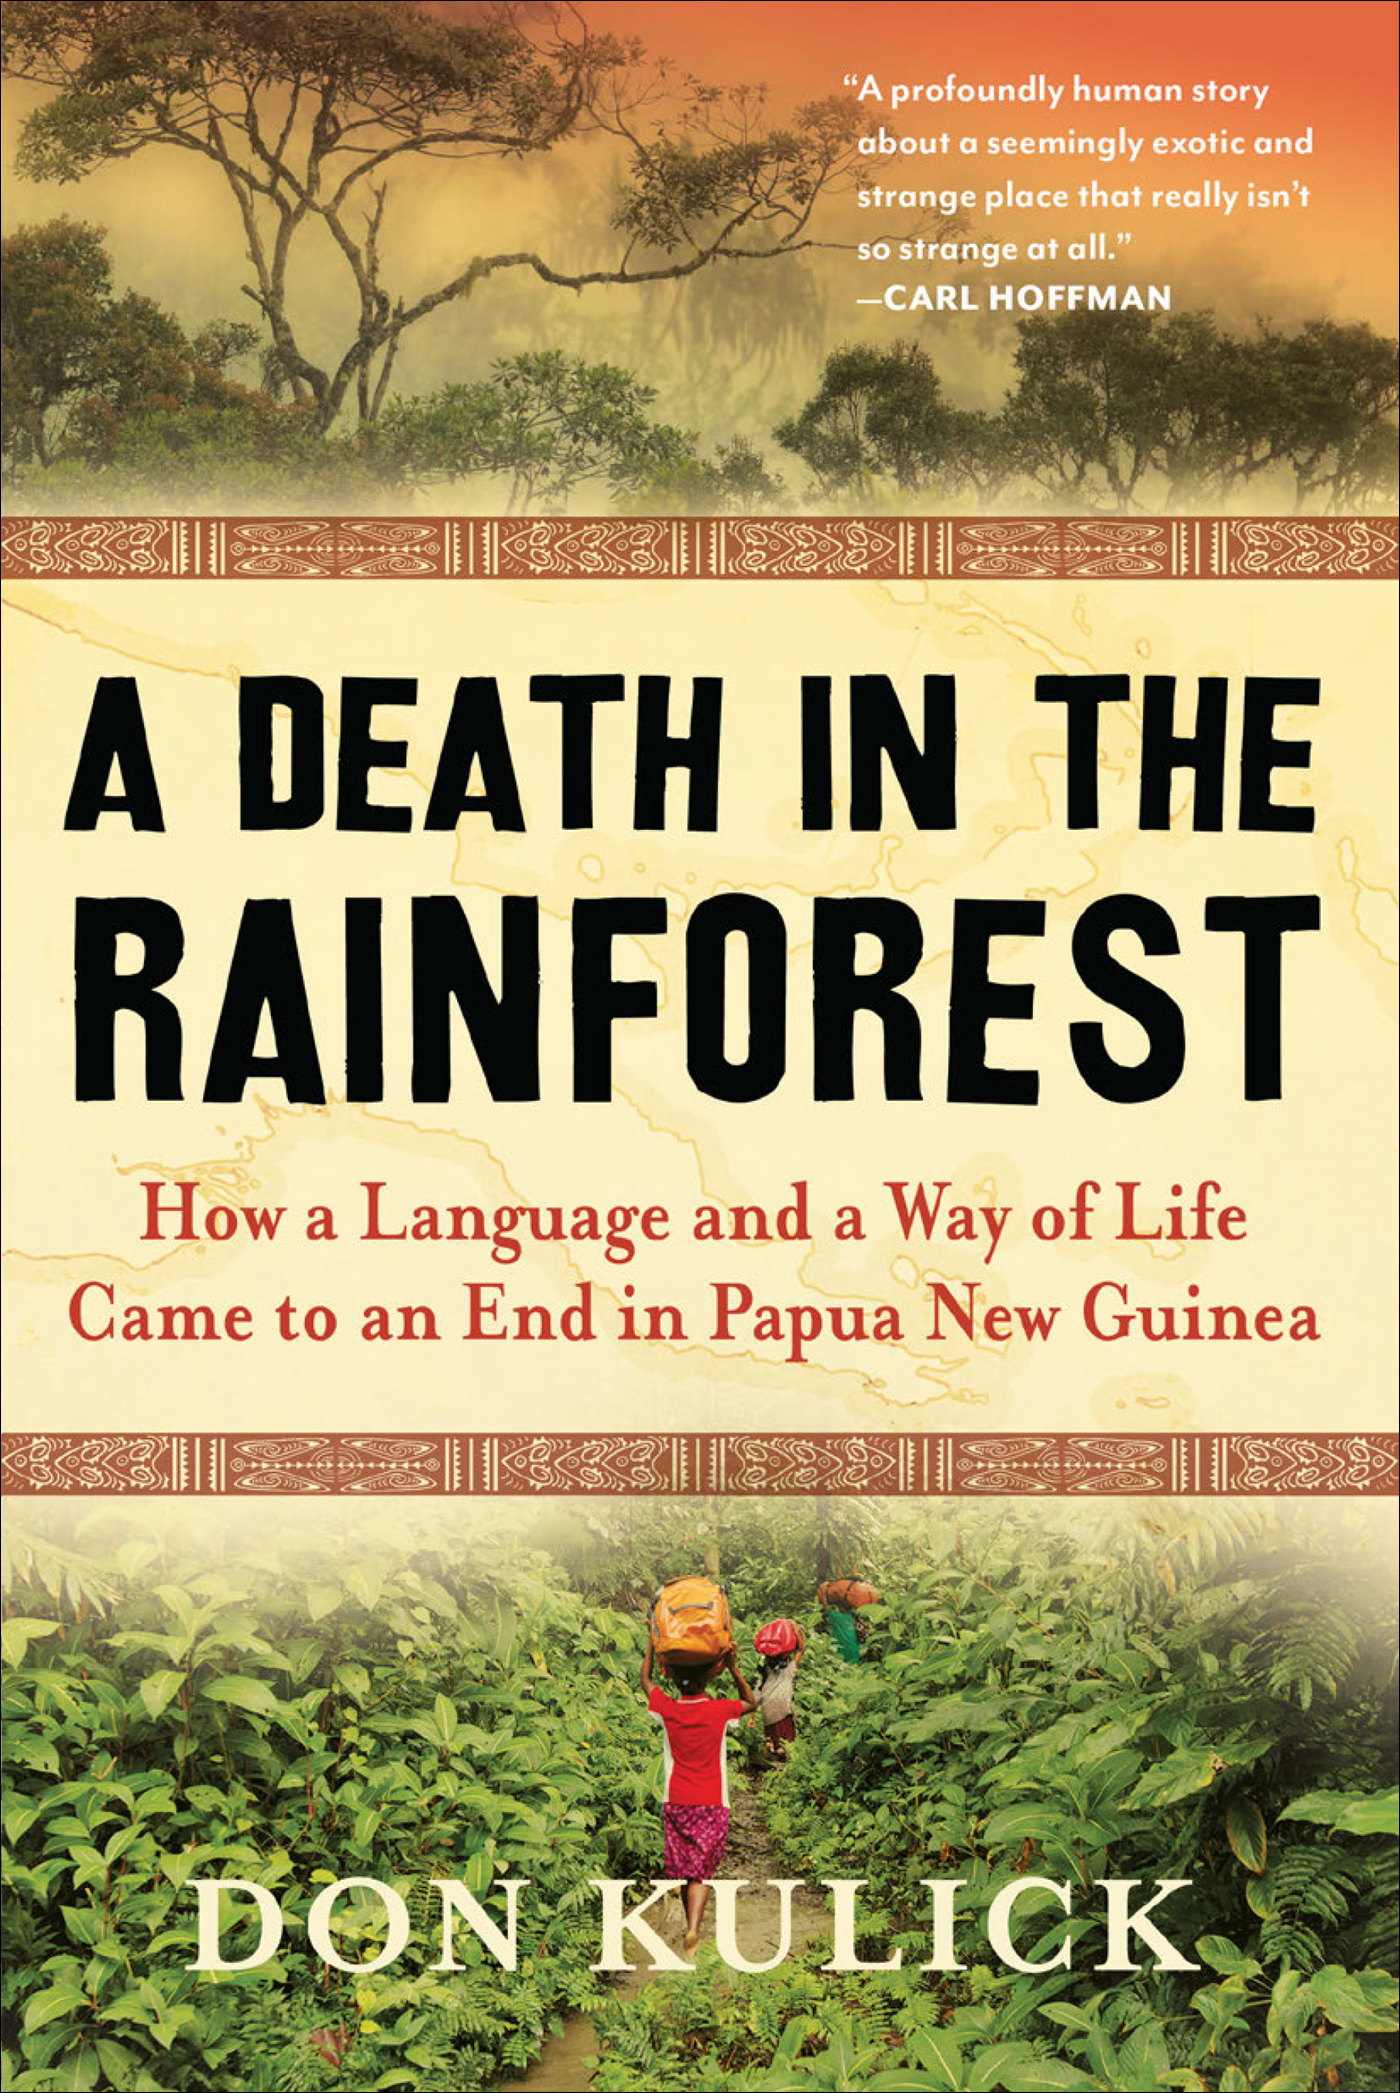 A Death in the Rainforest How a Language and a Way of Life Came to an End in Papua New Guinea - image 1